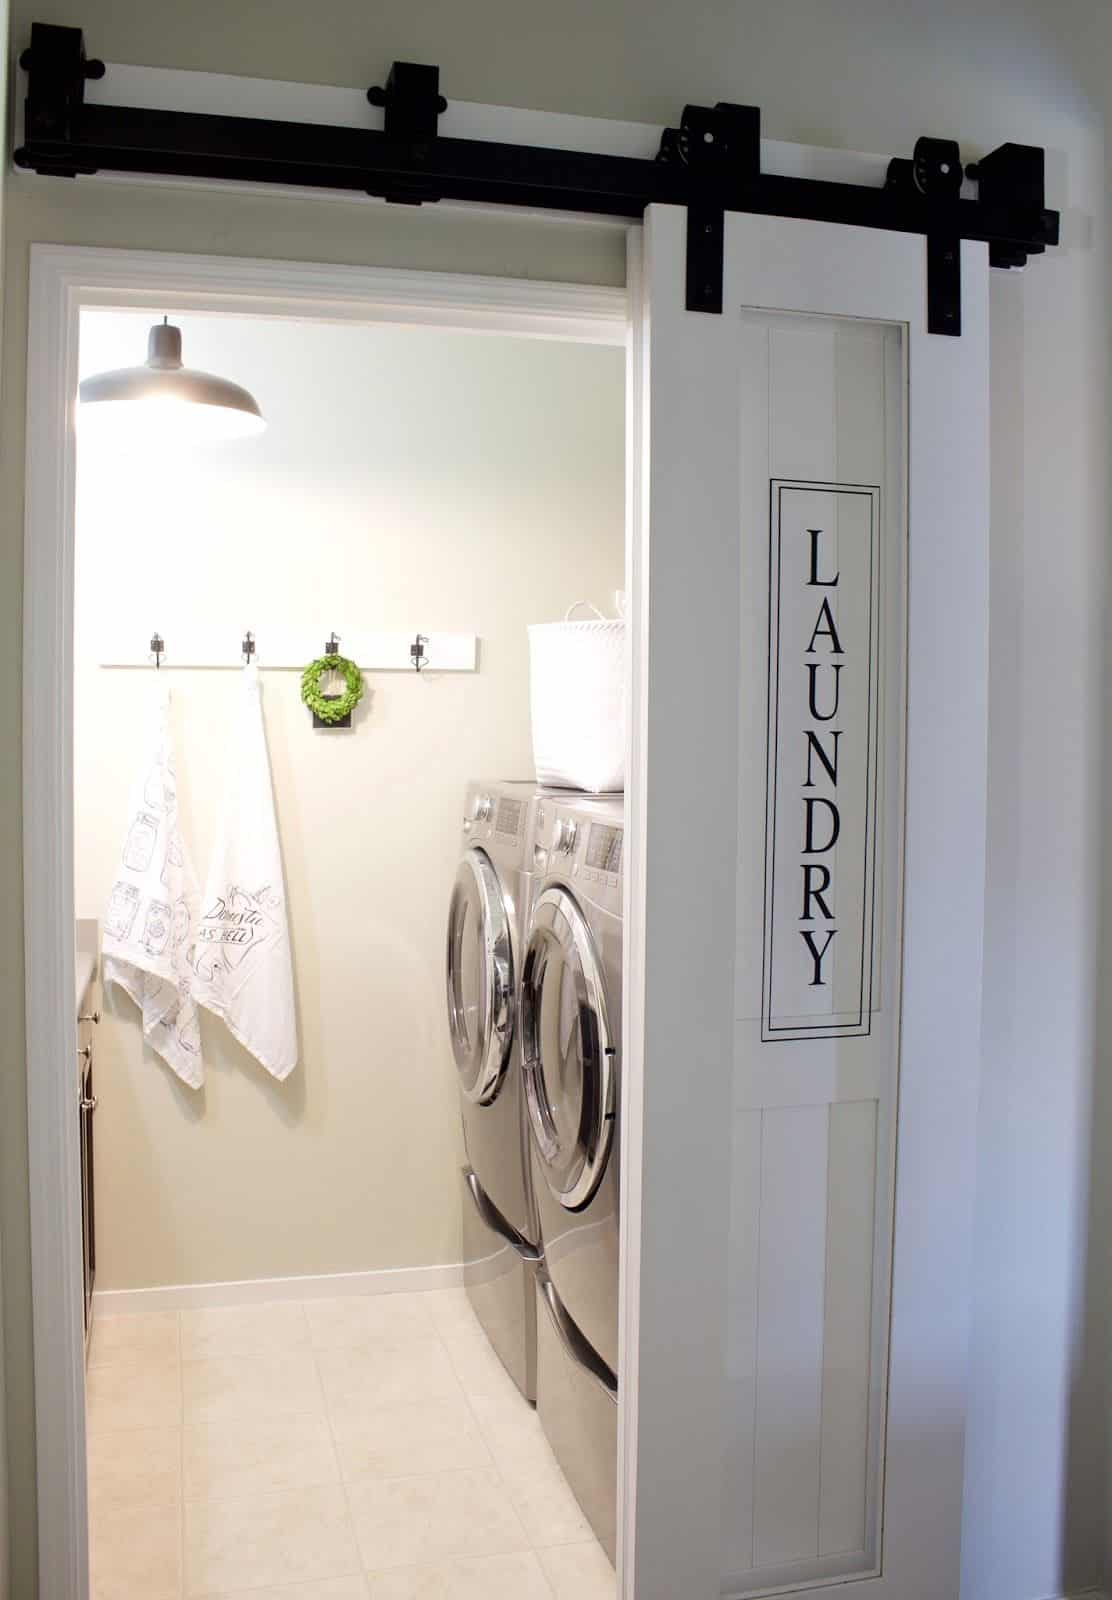 Give your laundry room a customized touch by adding the words “laundry” on your skinny barn doors.